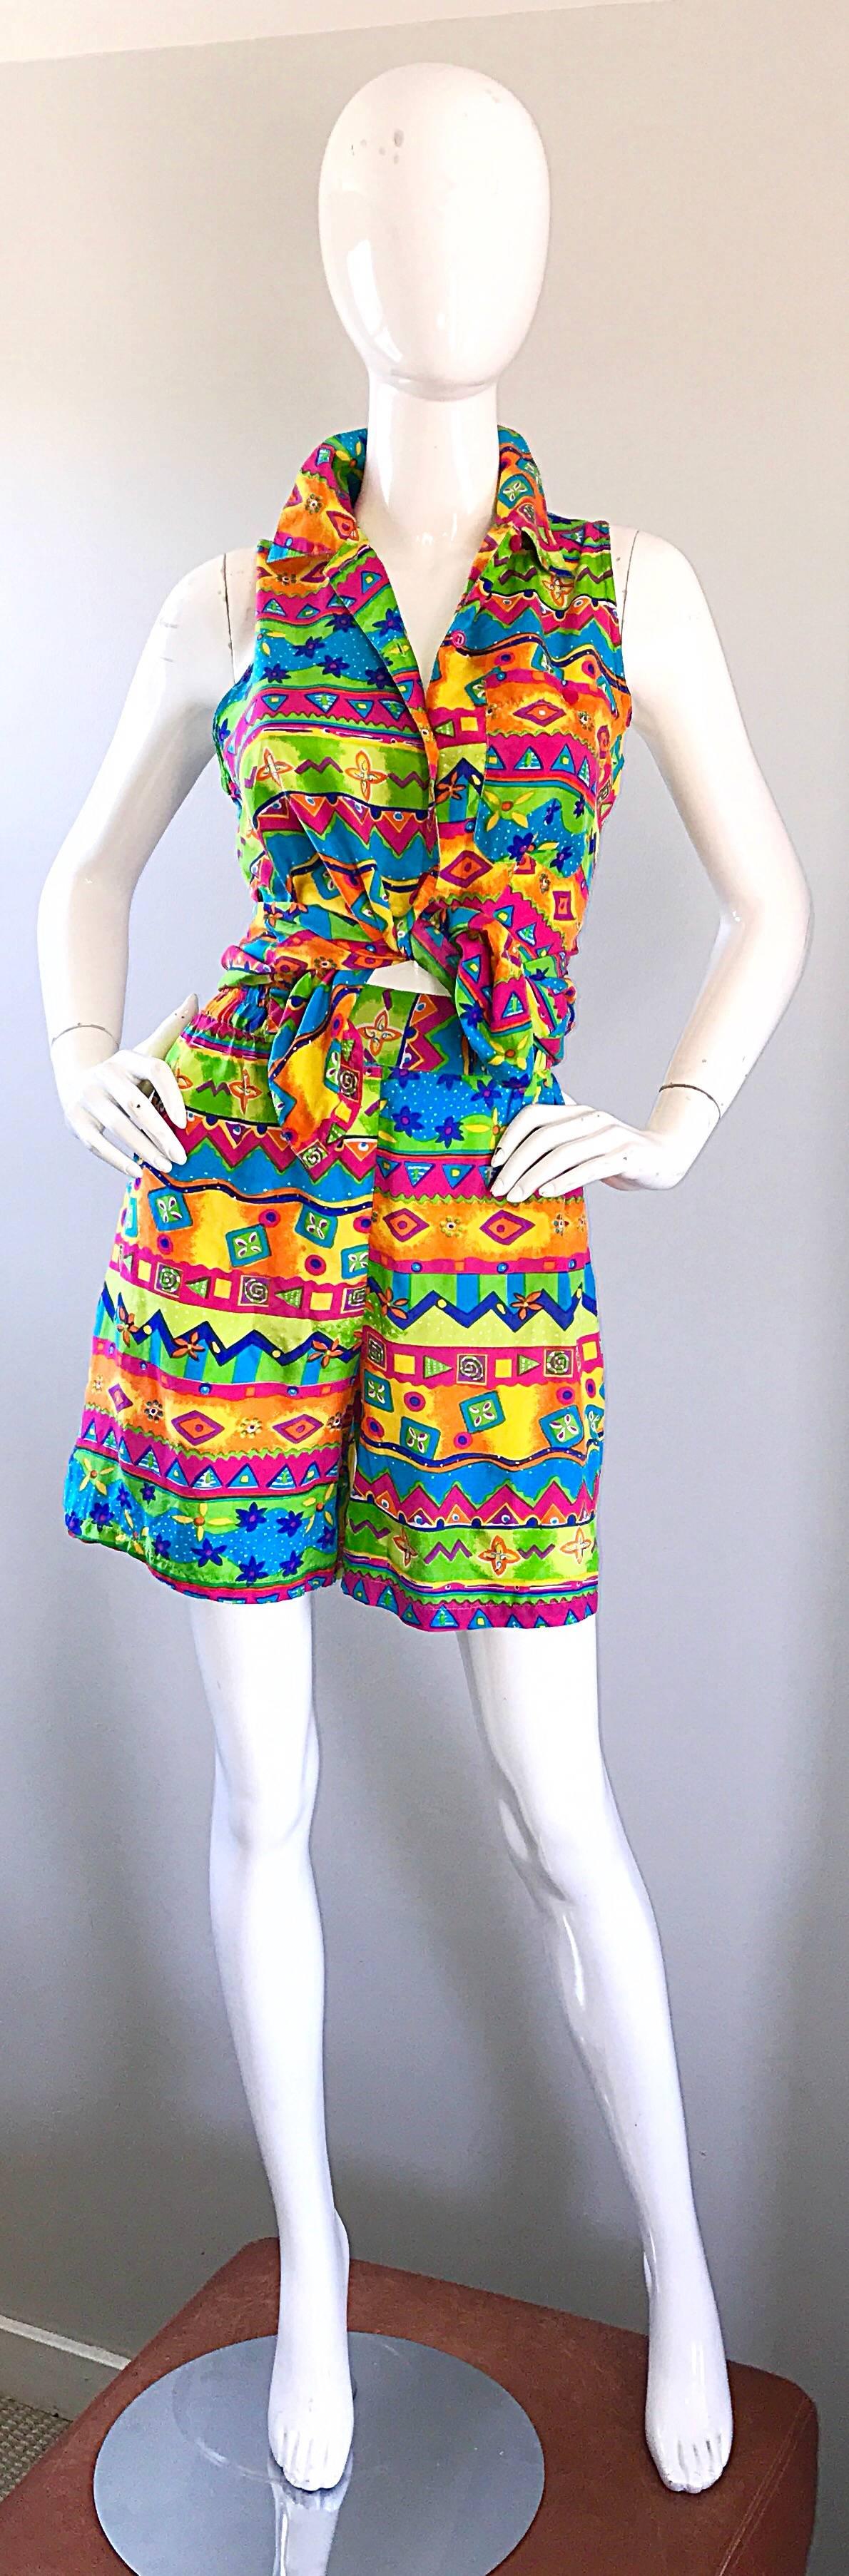 Amazing vintage OSCAR DE LA RENTA brightly colored ethnic print silk top and shorts! Features neon colors in hot pink, blue, yellow, green, and orange throughout. Blouse can either be tied up, or tucked in. Shorts are high waisted, and feature an